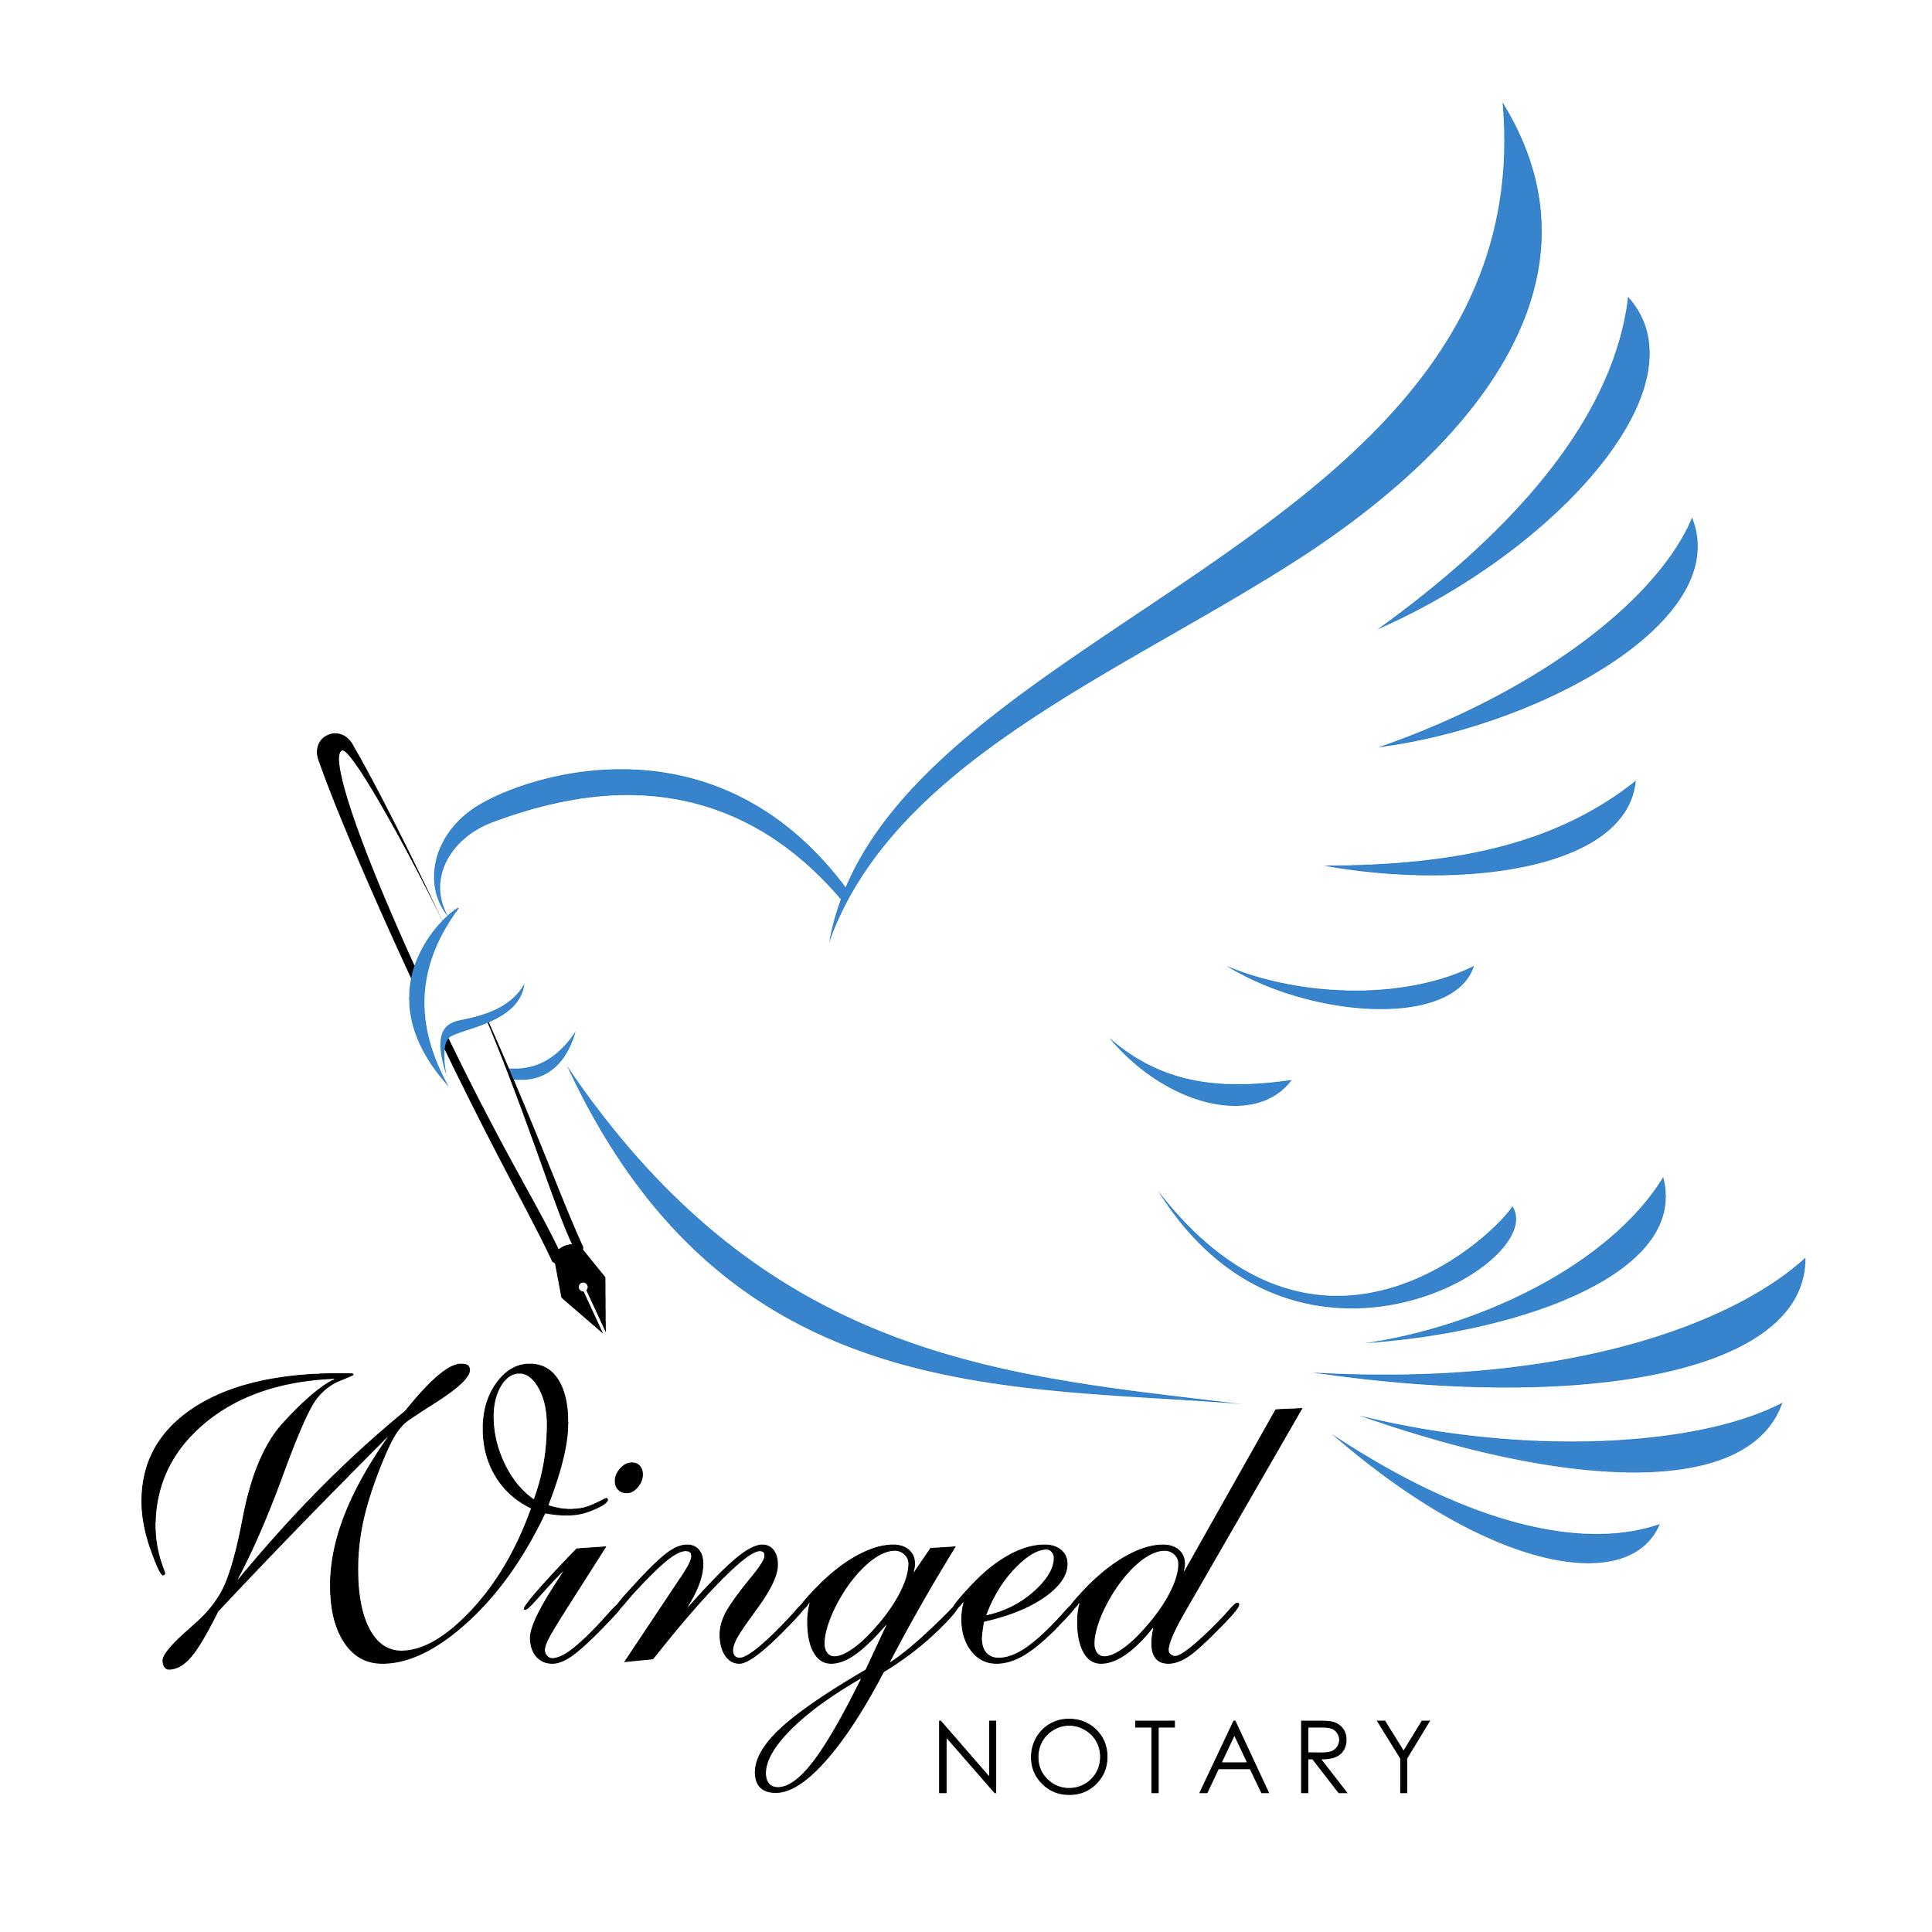 Winged-Notary-FINAL_Blue & Black.png